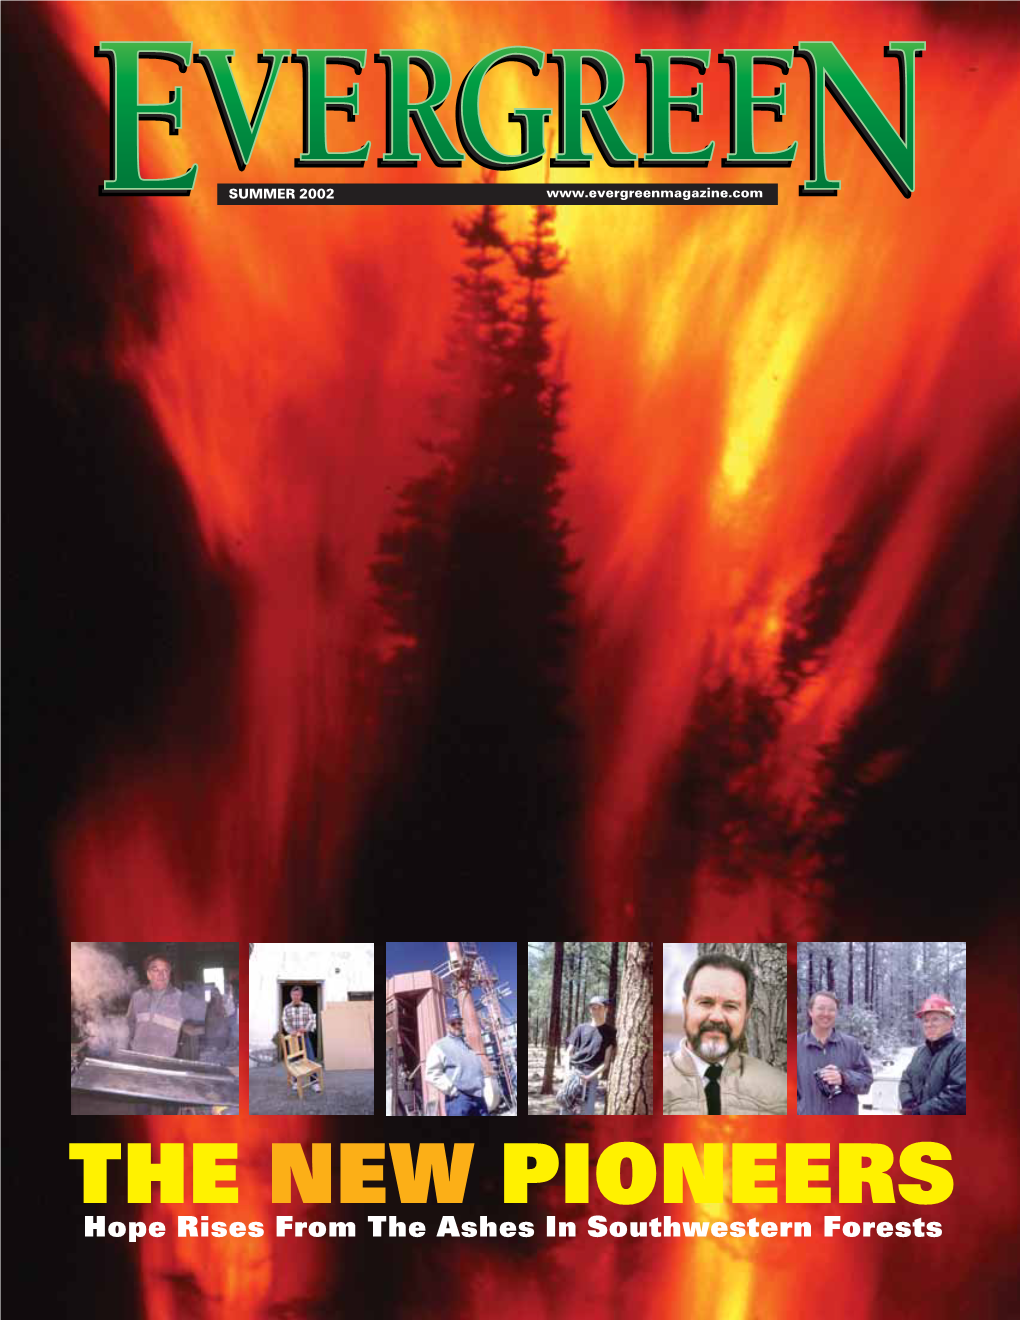 THE NEW PIONEERS Hope Rises from the Ashes in Southwestern Forests in This Issue